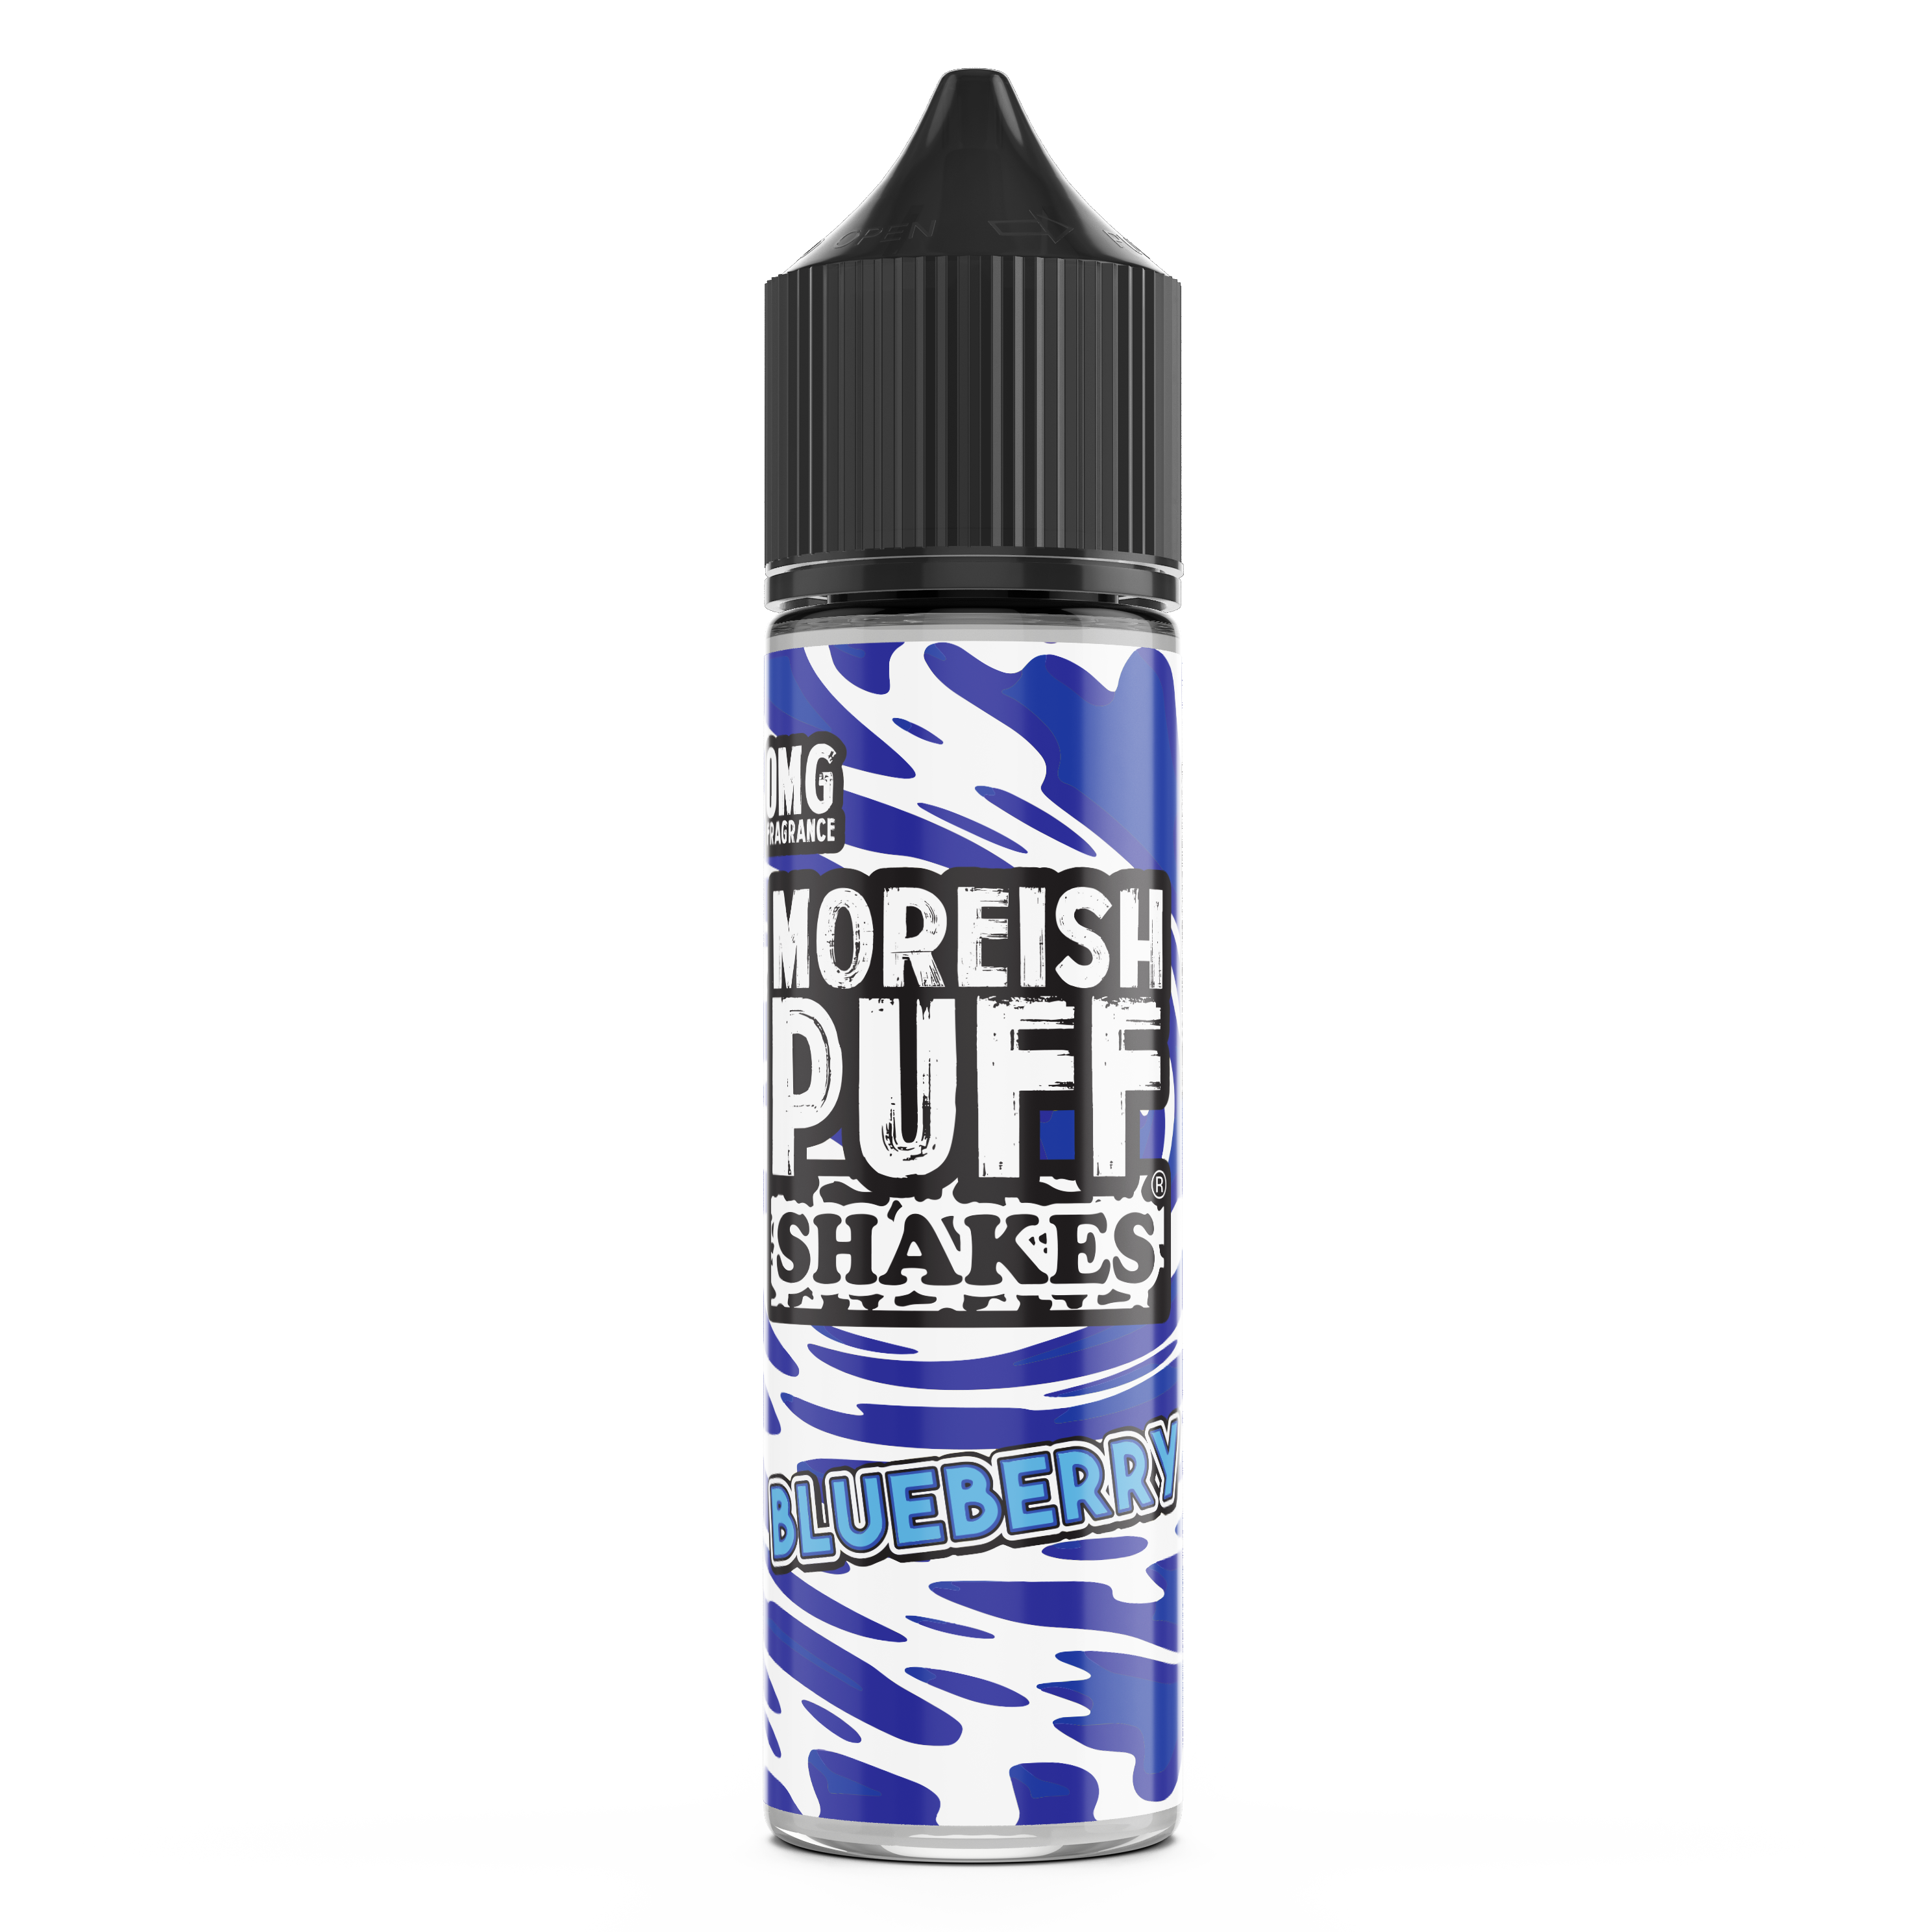 Blueberry Shakes E-Liquid by Moreish Puff 50ml Short Fill